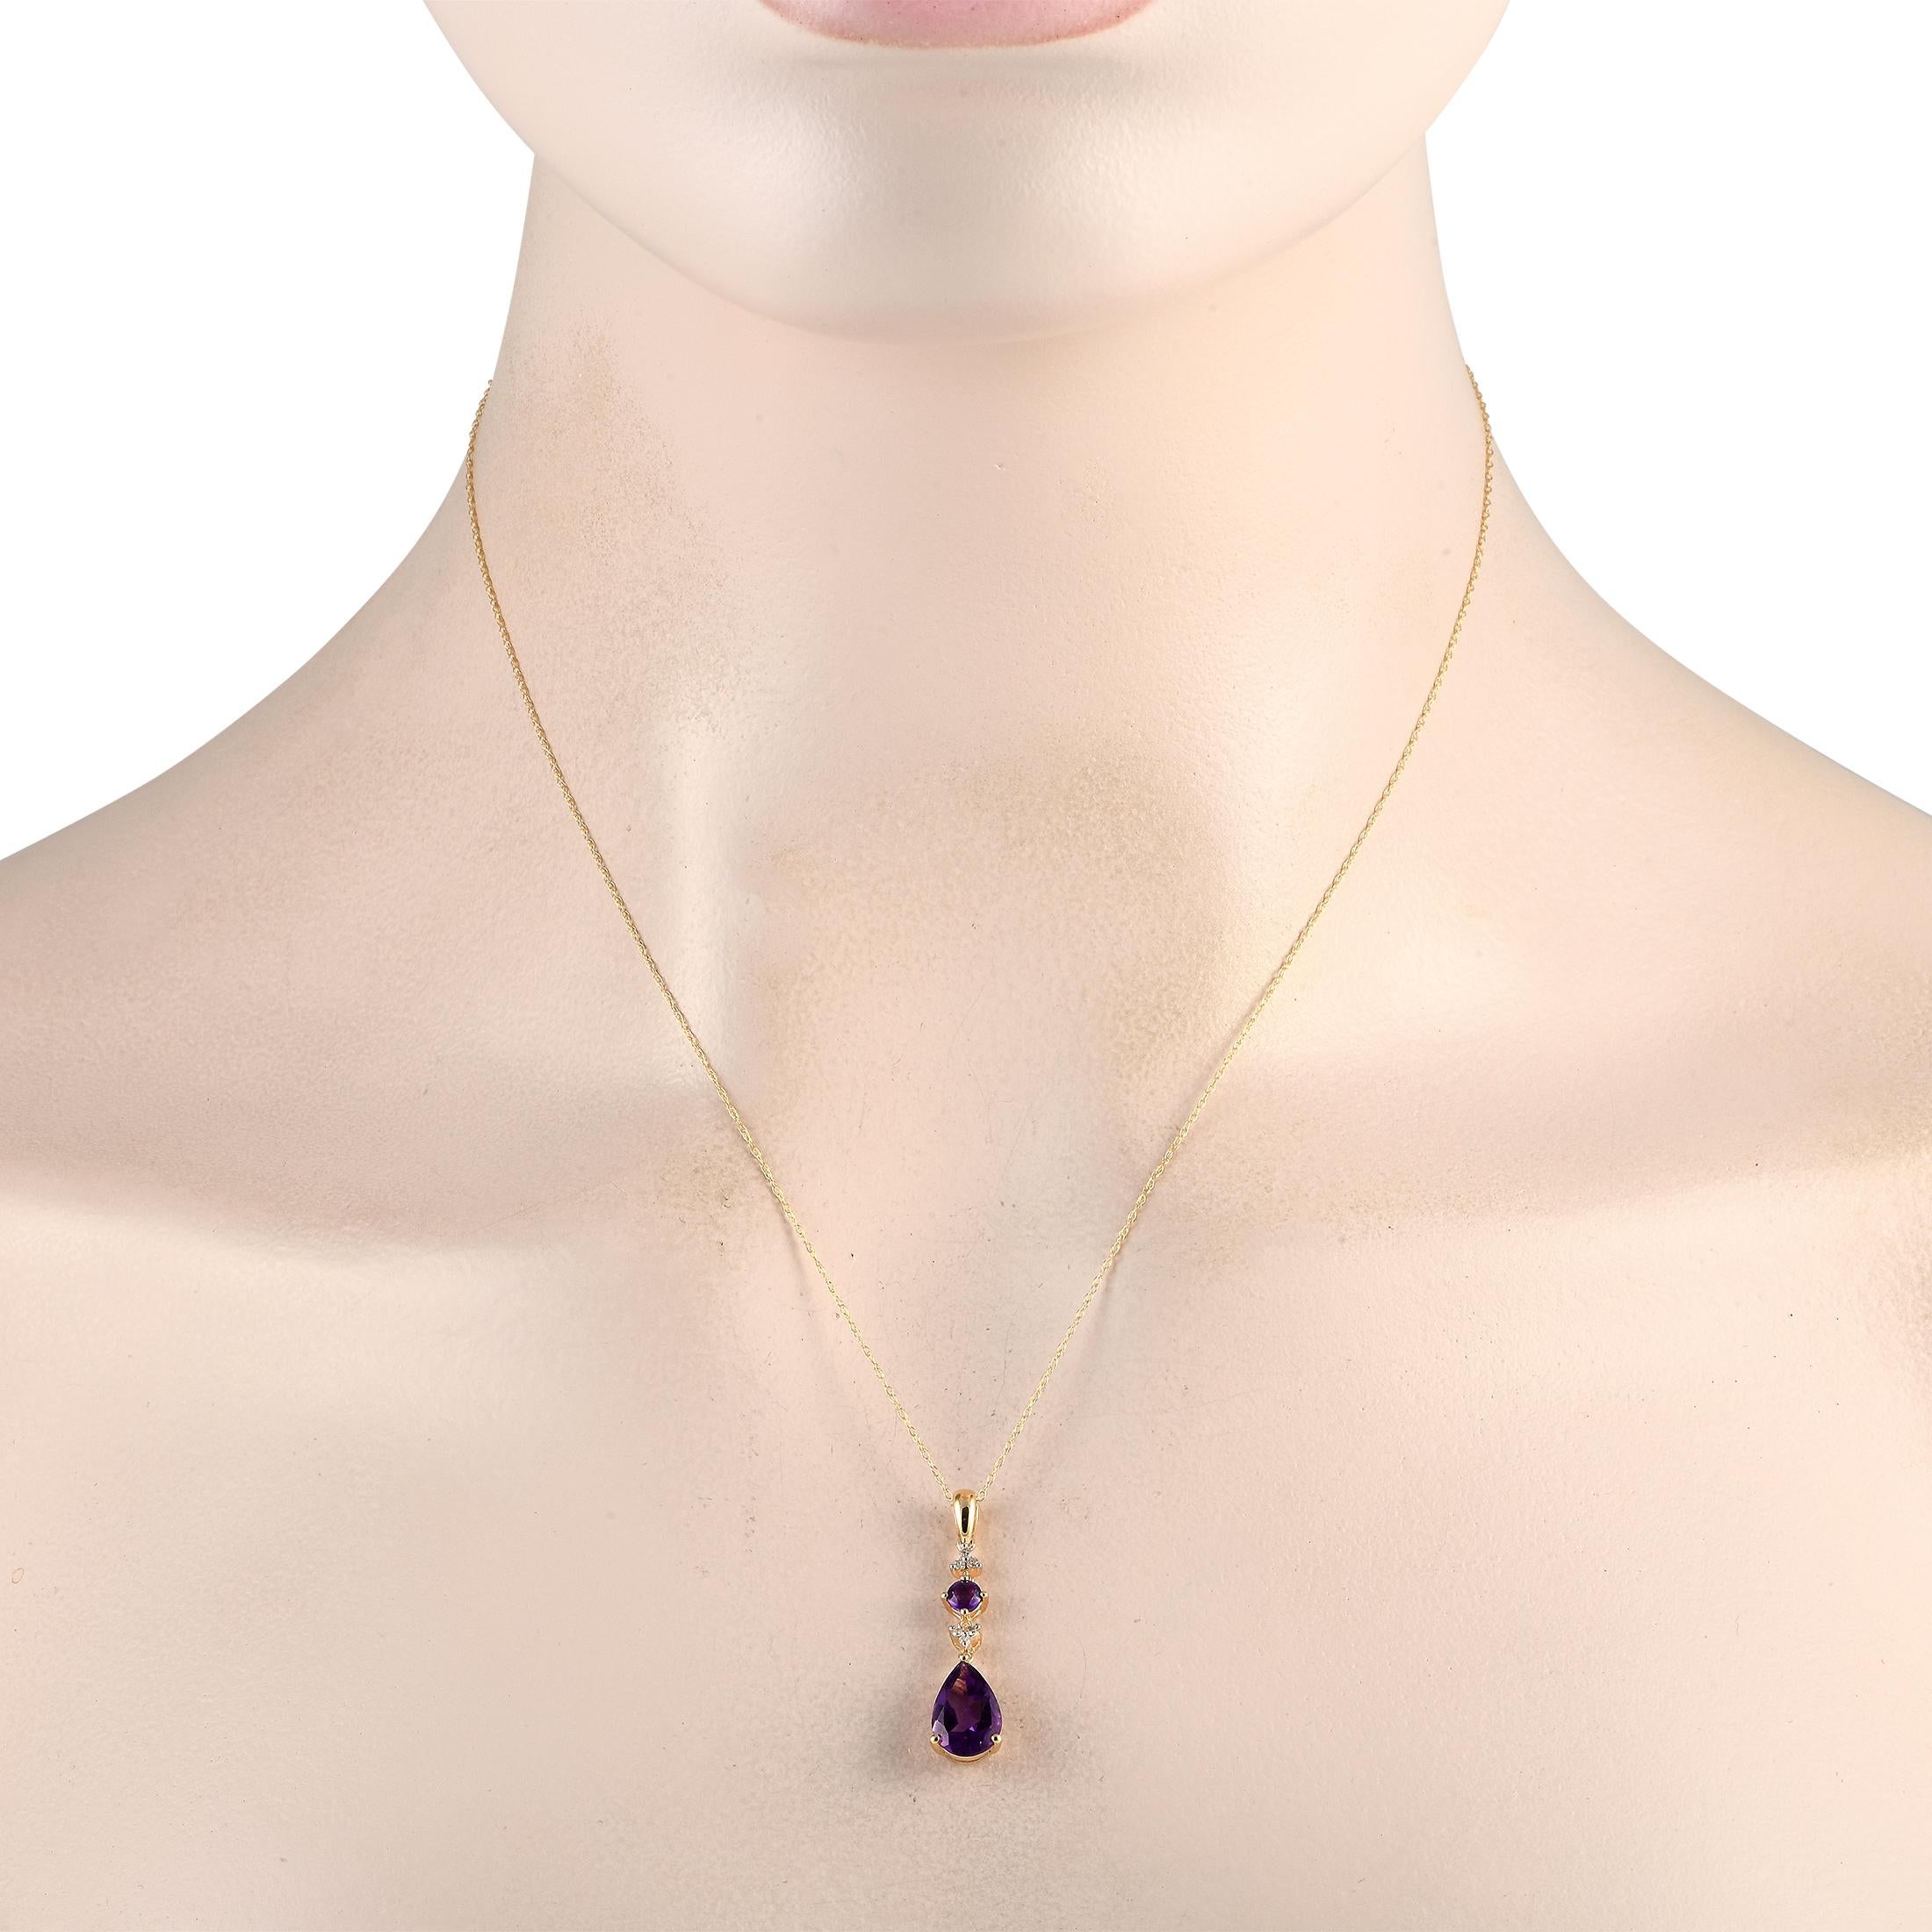 On this exquisite necklace, a 14K Yellow Gold pendant measuring 1.25 long and 0.25 wide is elevated by captivating Amethyst gemstones and Diamonds totaling 0.05 carats. It comes complete with a matching 18 chain.This jewelry piece is offered in